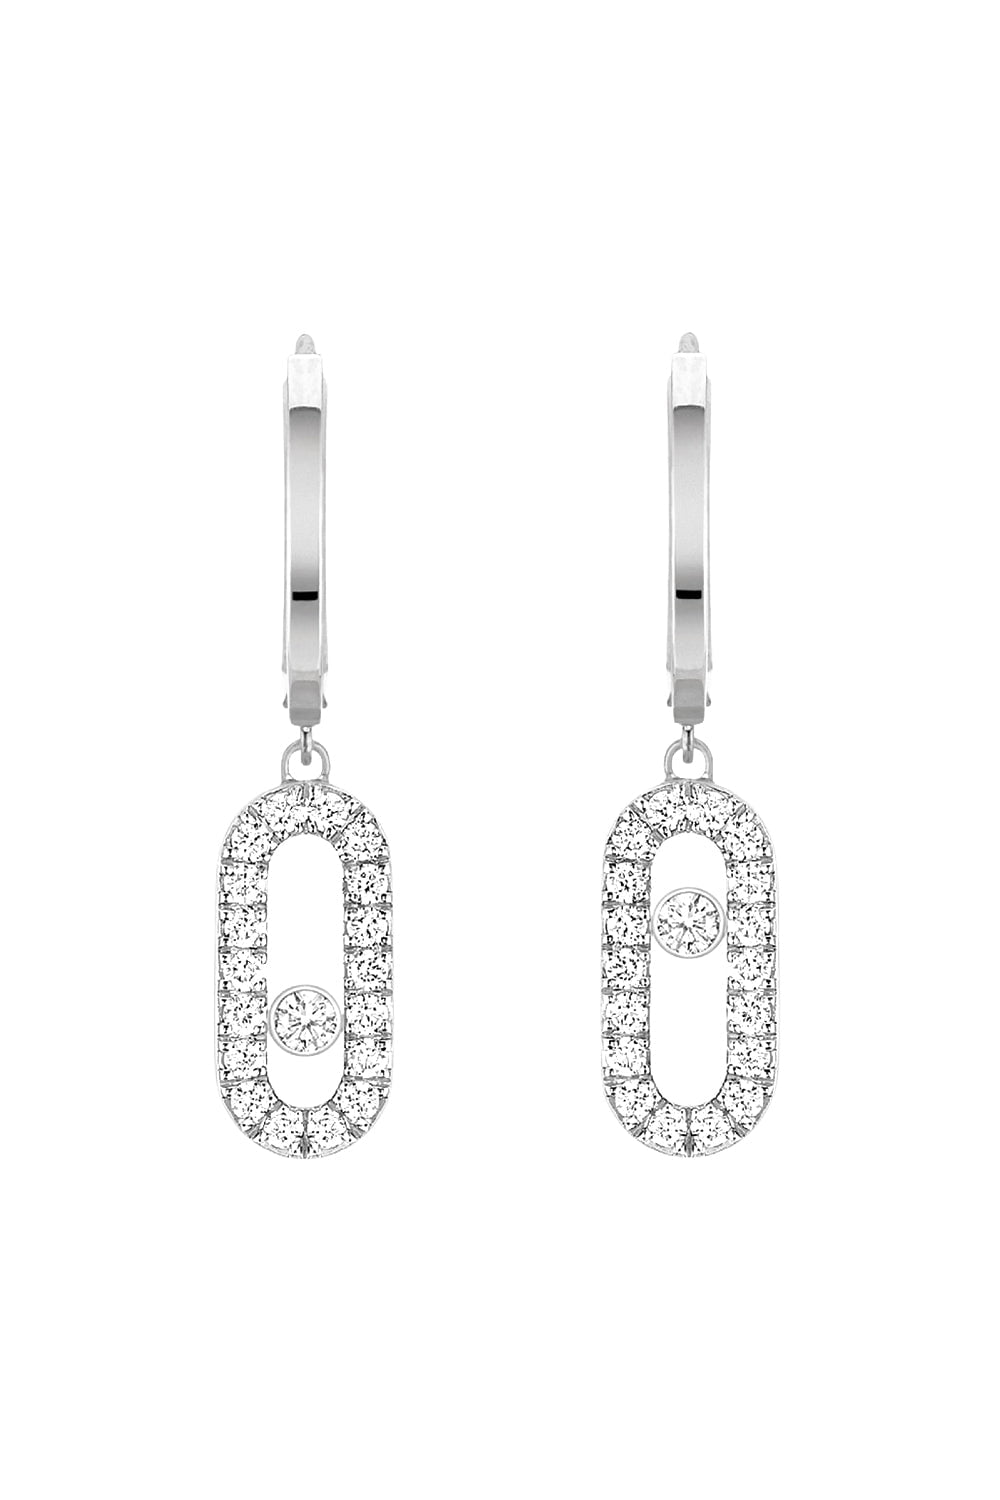 MESSIKA-Move Uno Hoop Earrings-WHITE GOLD